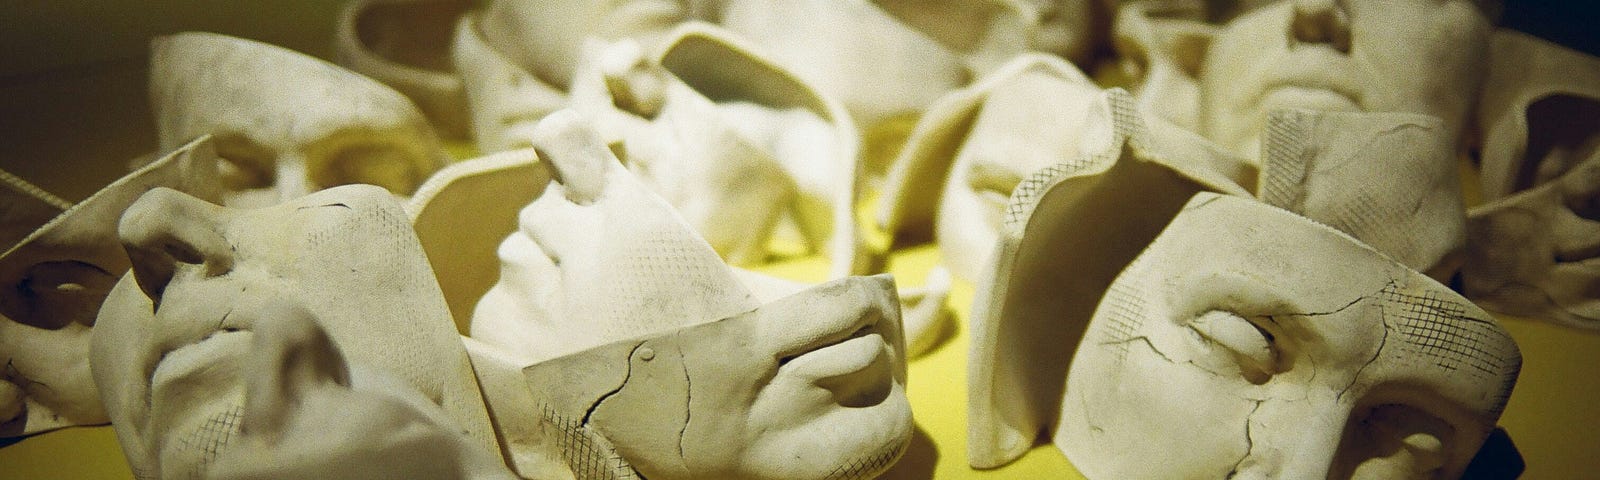 a yellow surface is covered in broken masks made of clay or stone